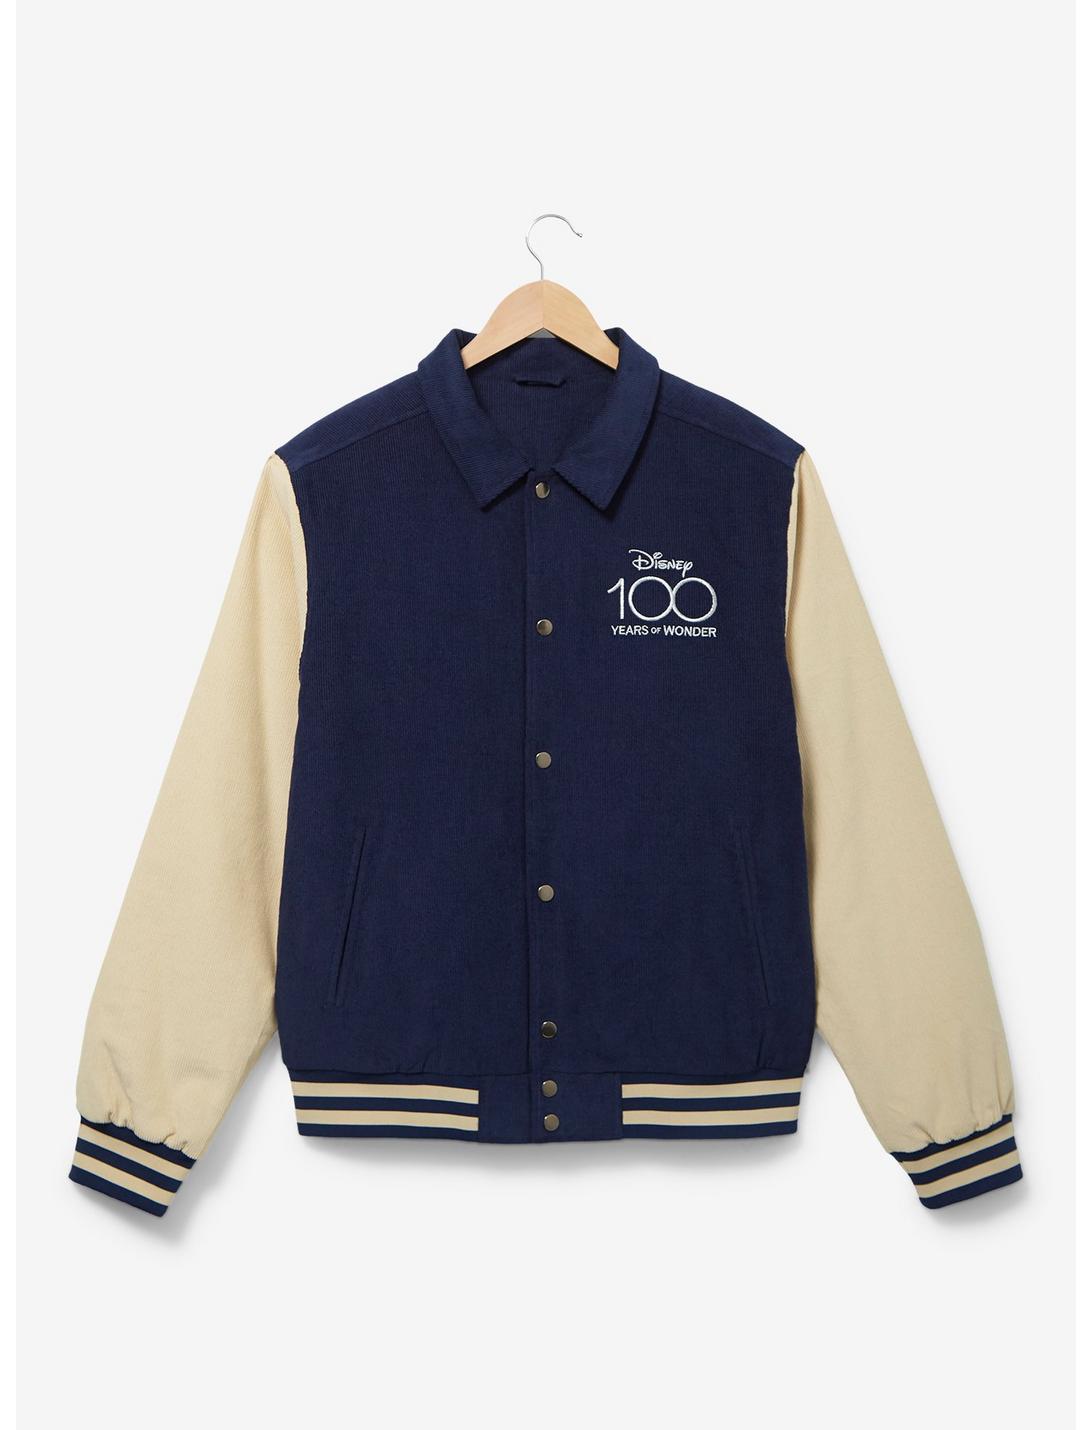 Disney 100 Mickey Mouse Collared Varsity Jacket - BoxLunch Exclusive, NAVY, hi-res